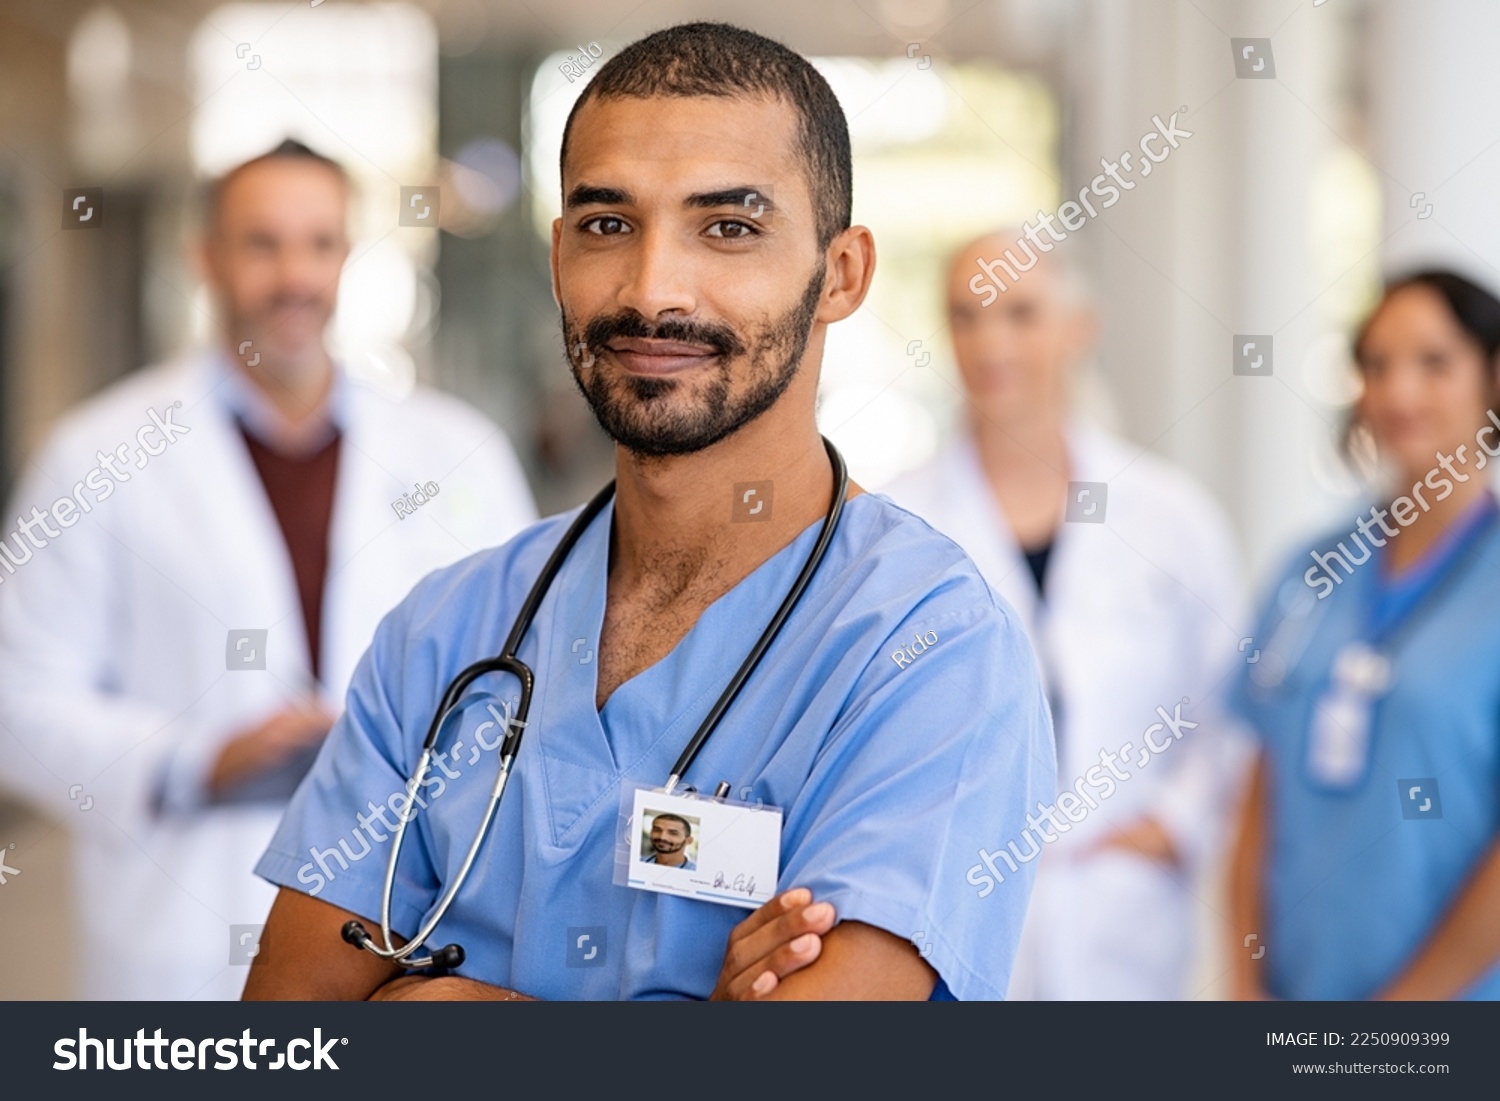 Portrait of smiling middle eastern man nurse with stethoscope looking at camera. Young doctor smiling while standing in hospital corridor with health care team in background. Successful indian surgeon #2250909399